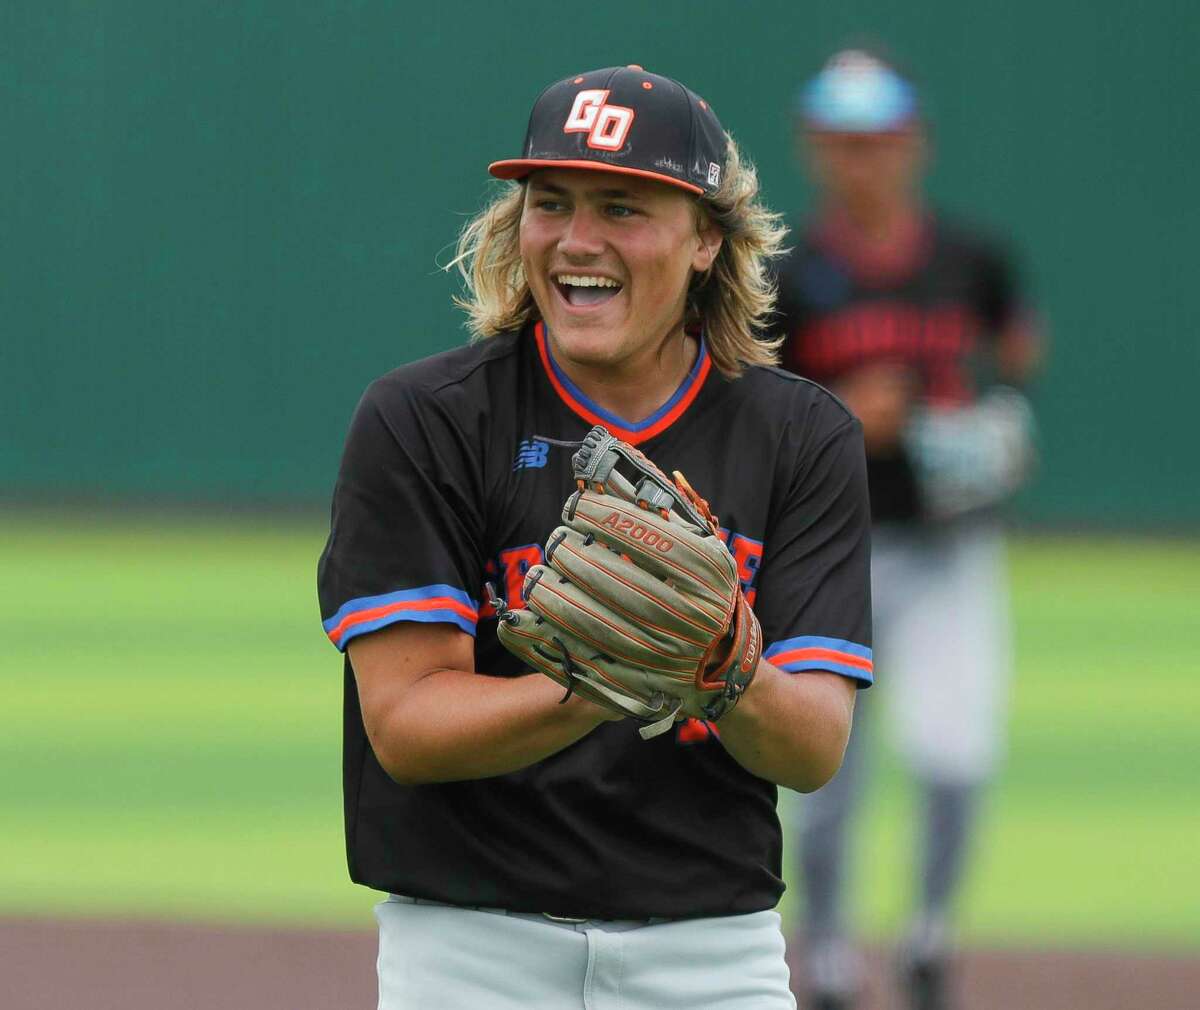 Grand Oaks starting pitcher Hudson Hamilton (19) reacts after a play by catcher Preston Havenor to end the fifth inning of a Region II-6A area high school playoff game at Tomball Memorial High School, Saturday, May 15, 2021, in Tomball.